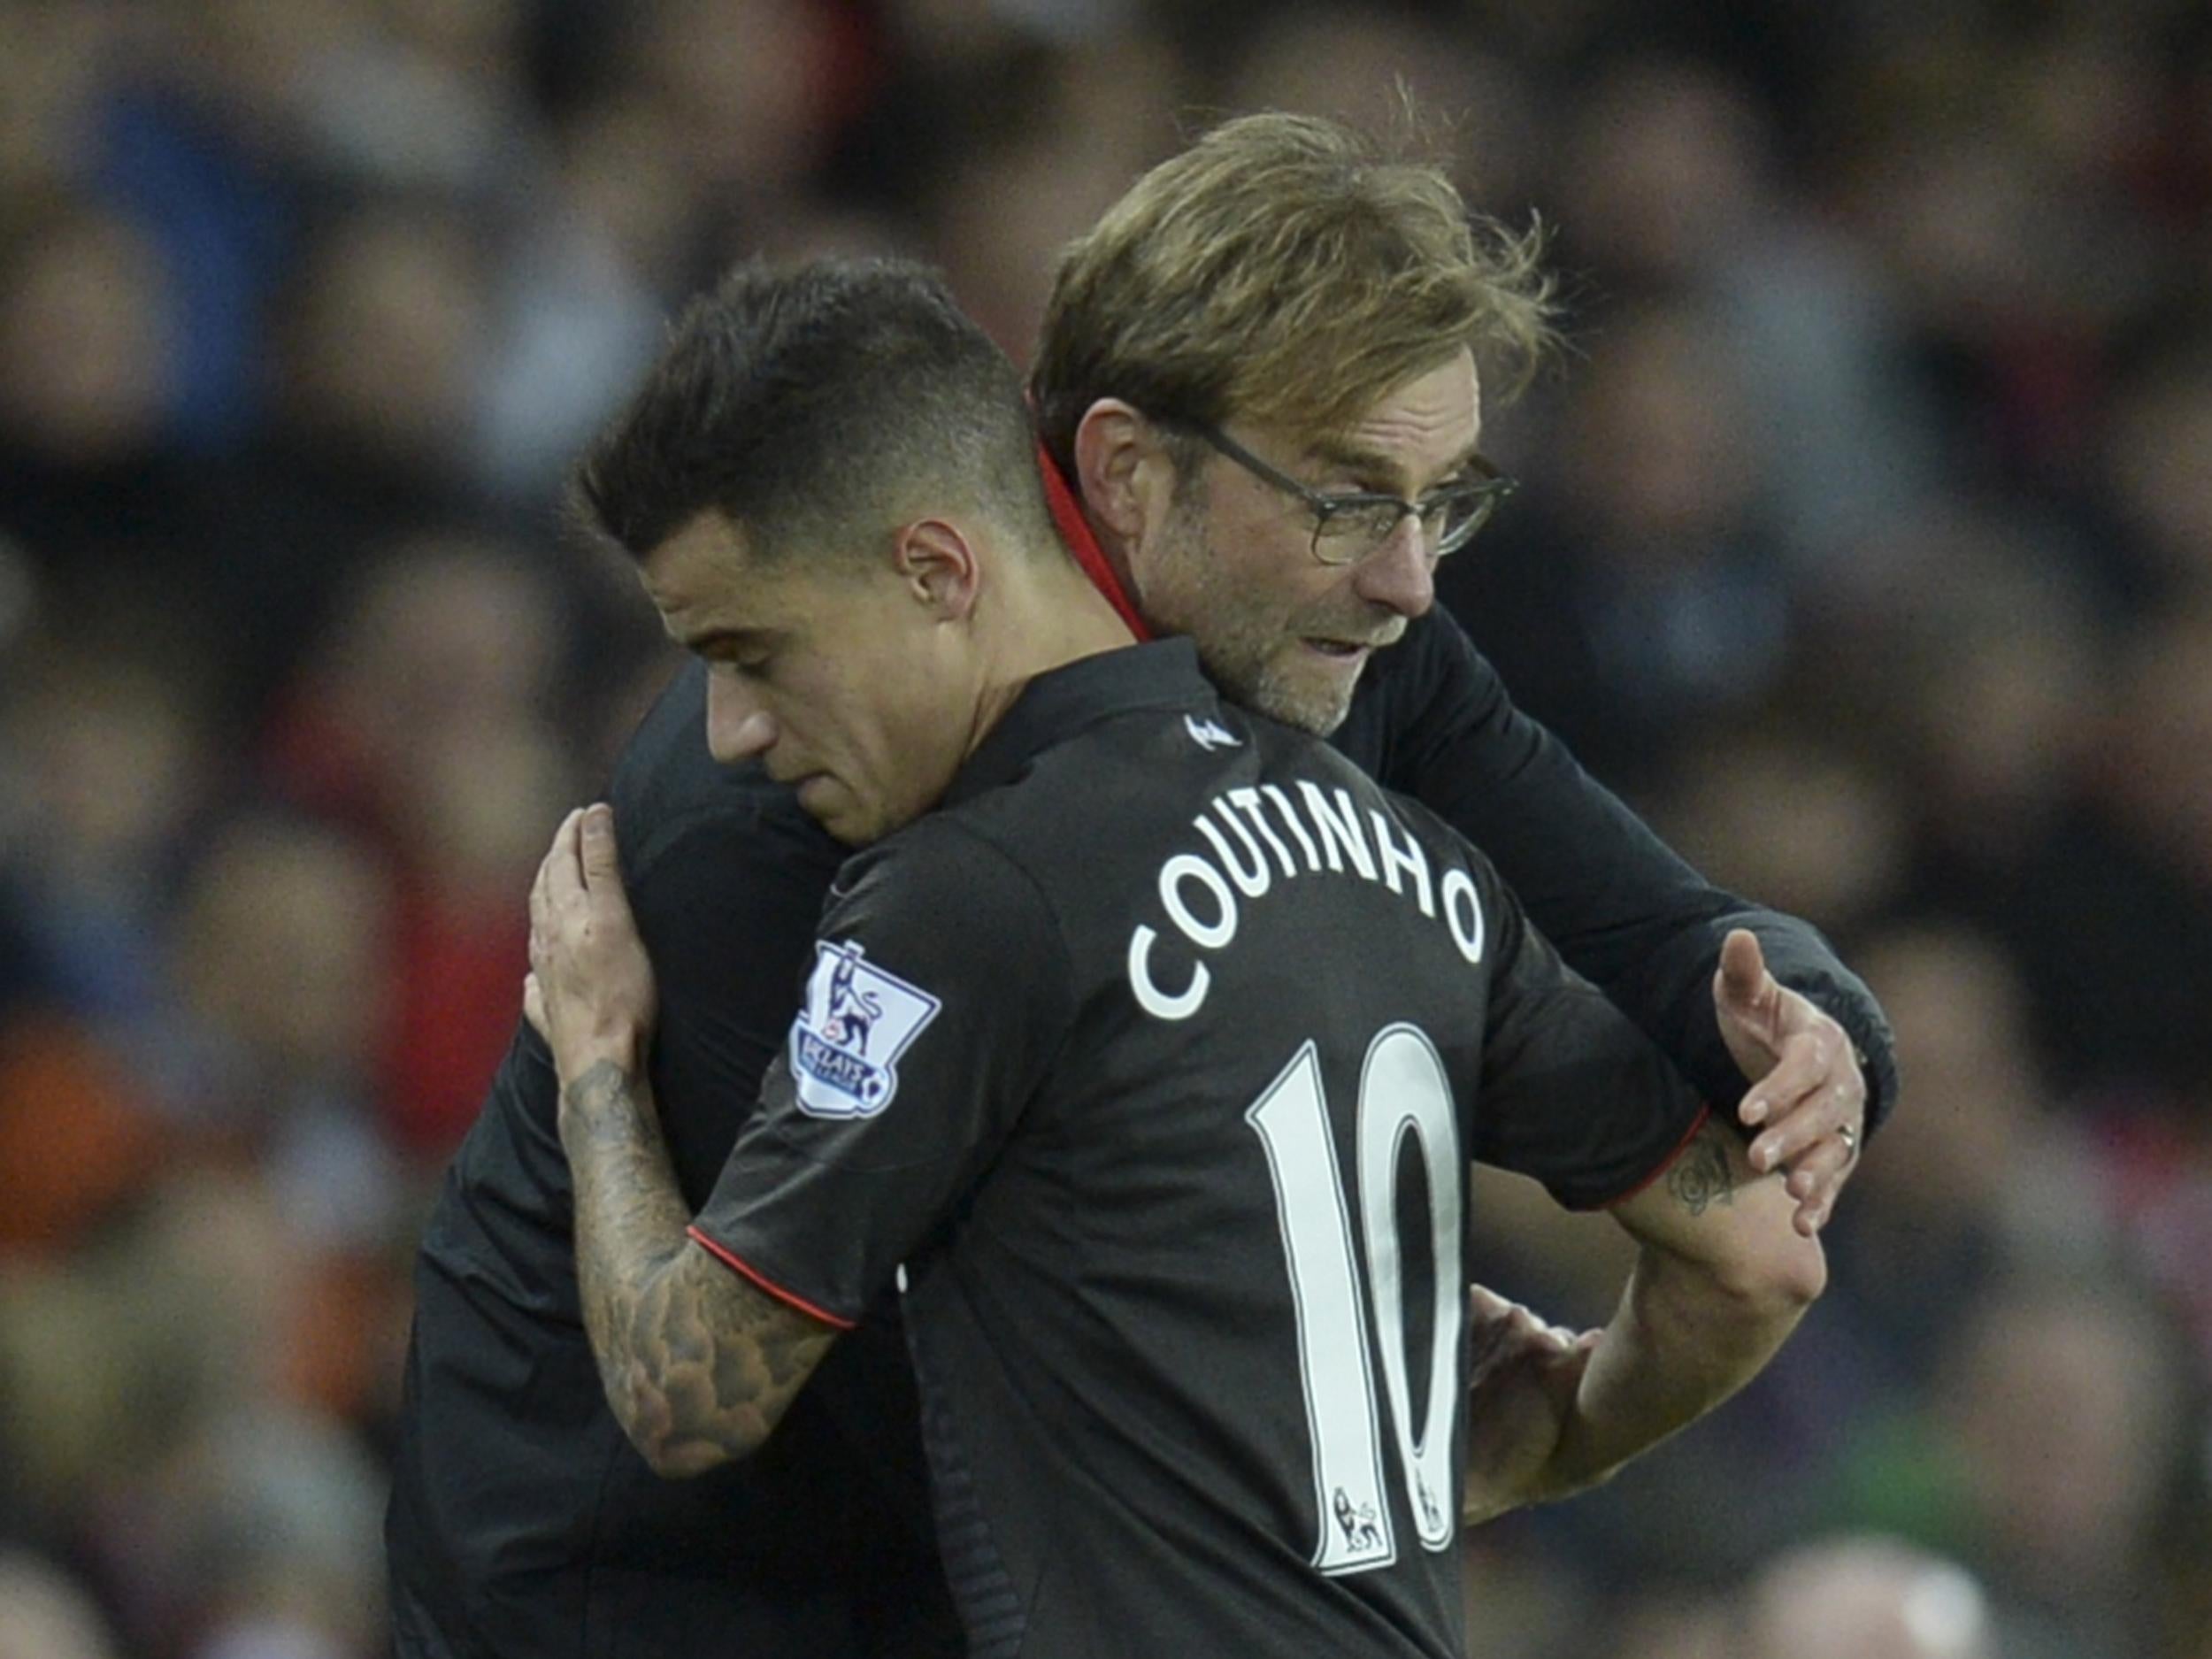 Jurgen Klopp and Philippe Coutinho embrace on the sidelines